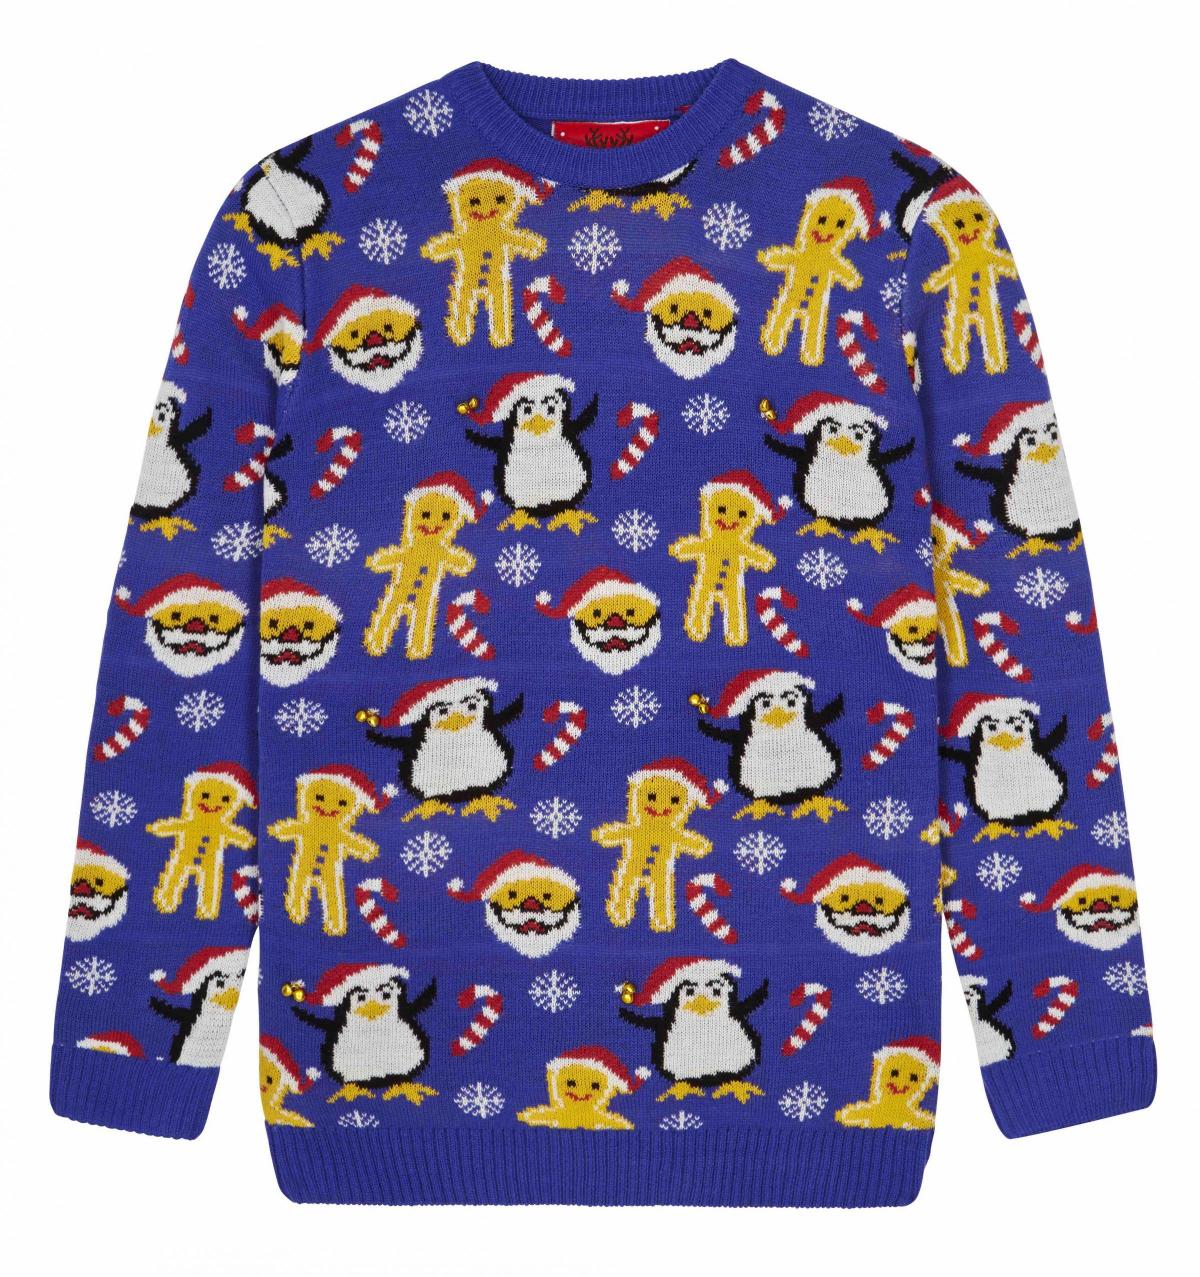 Amazon Prime Now, The Christmas Workshop gingerbread women's jumper, £20